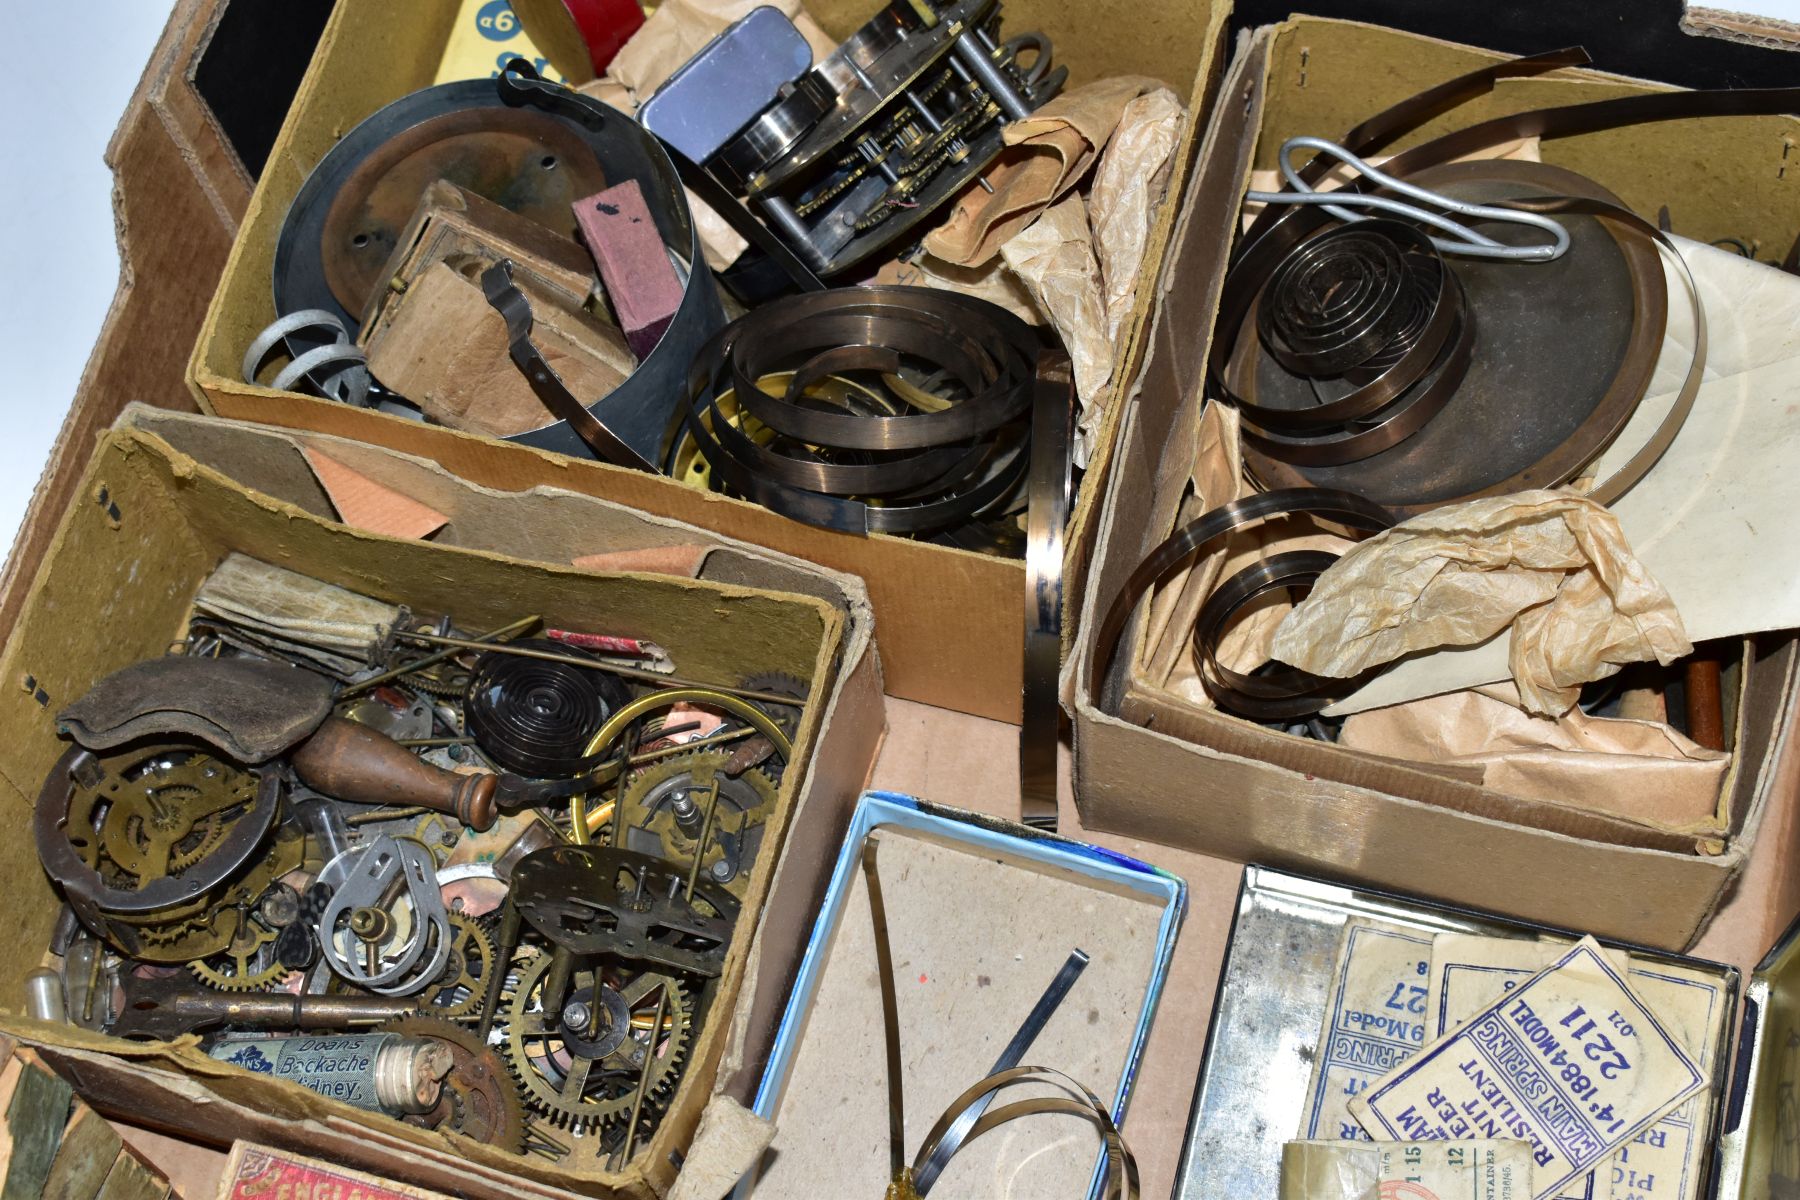 TWO BOXES OF ASSORTED WATCH MAKERS PARTS, GLASSES, COGS, SPRINGS, CROWNS, DECONSTTUCTED WATCH - Image 13 of 30